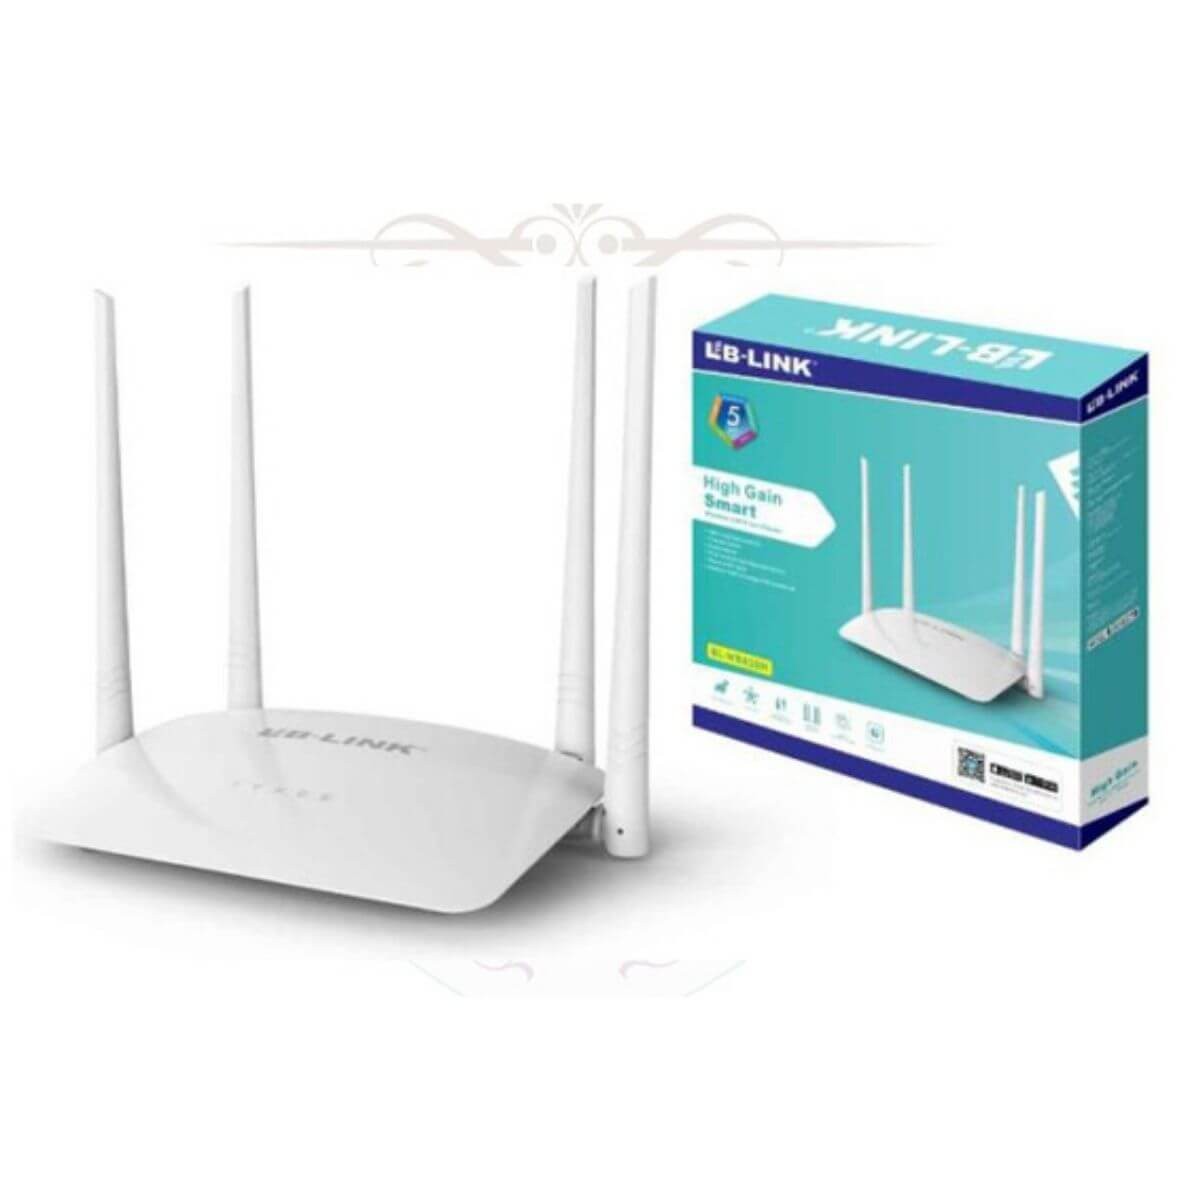 LB Link BL-WR450H Wireless Router 300mbps (WHITE)